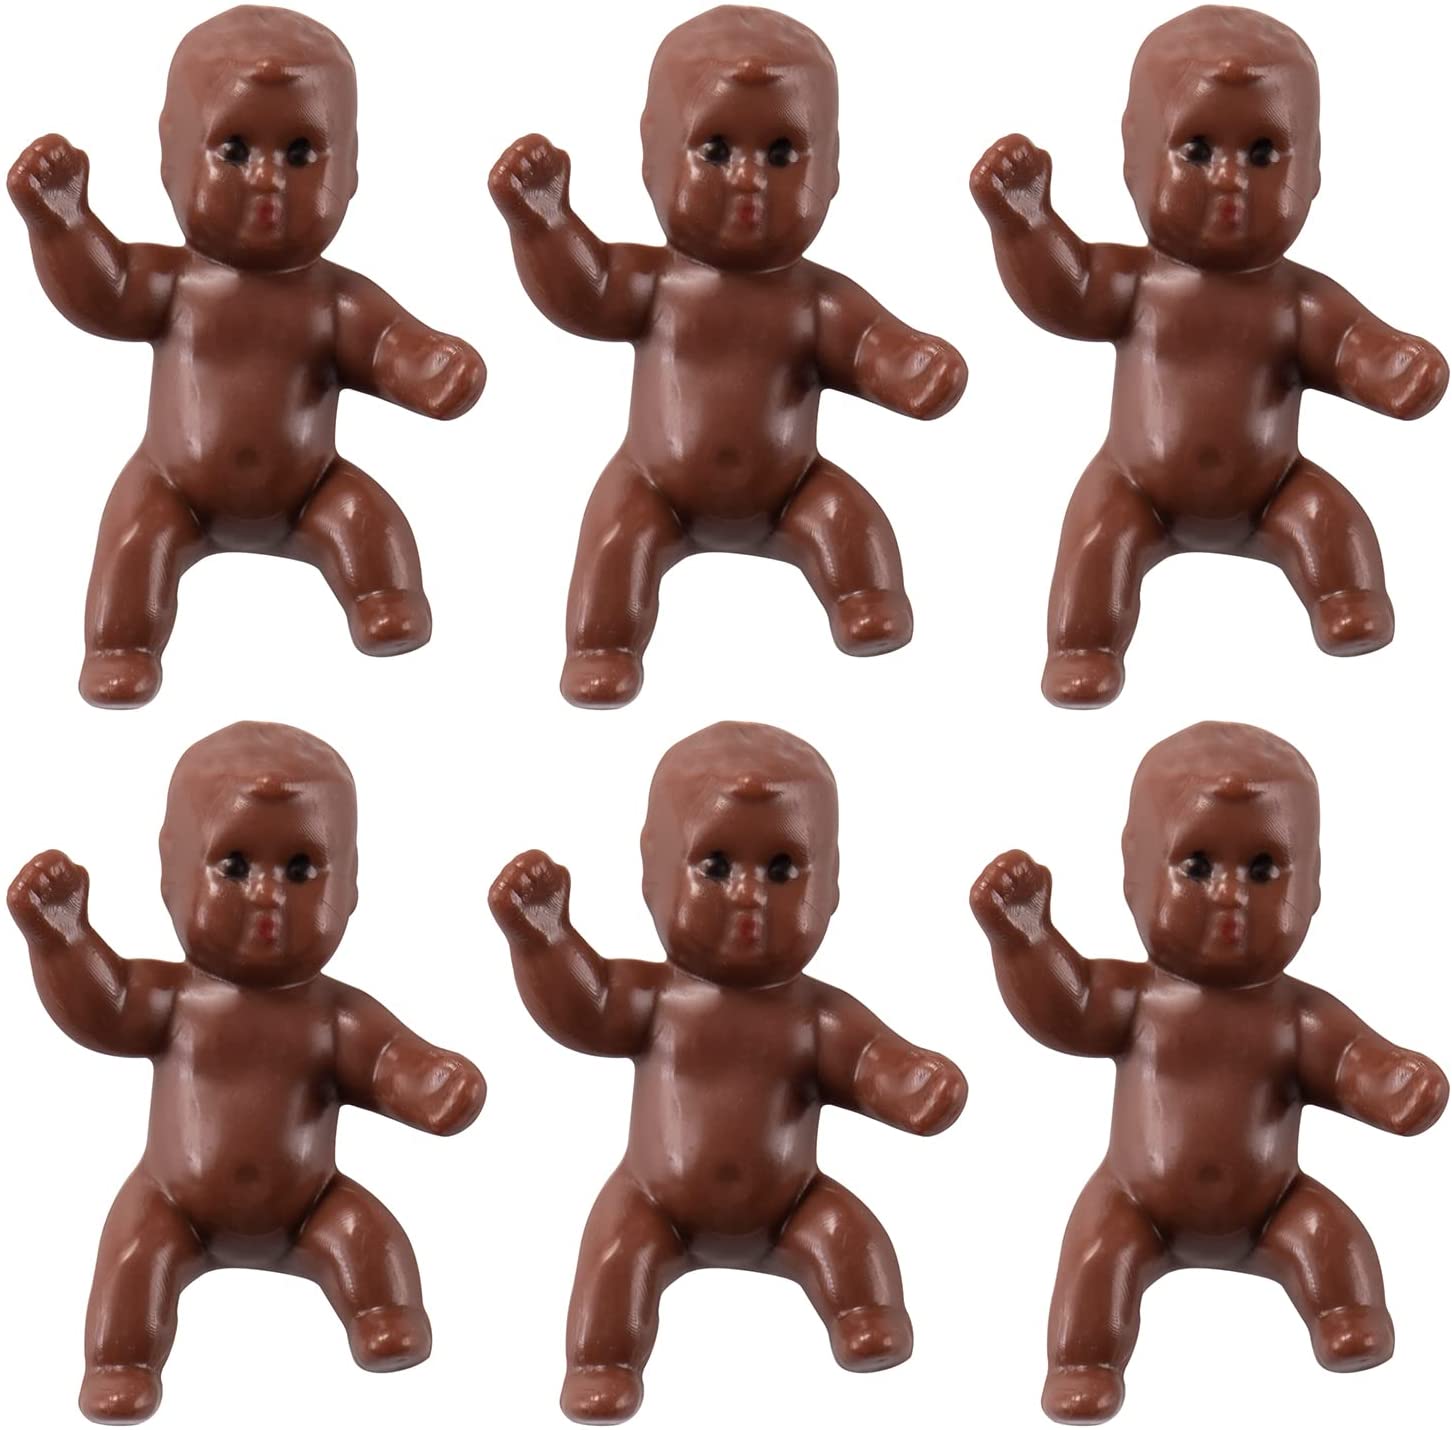 JUXINGDAZYF 1.2 King Cake Babies Mini Plastic Babies for Baby Shower Ice Cube Game Party Favor Decorations 